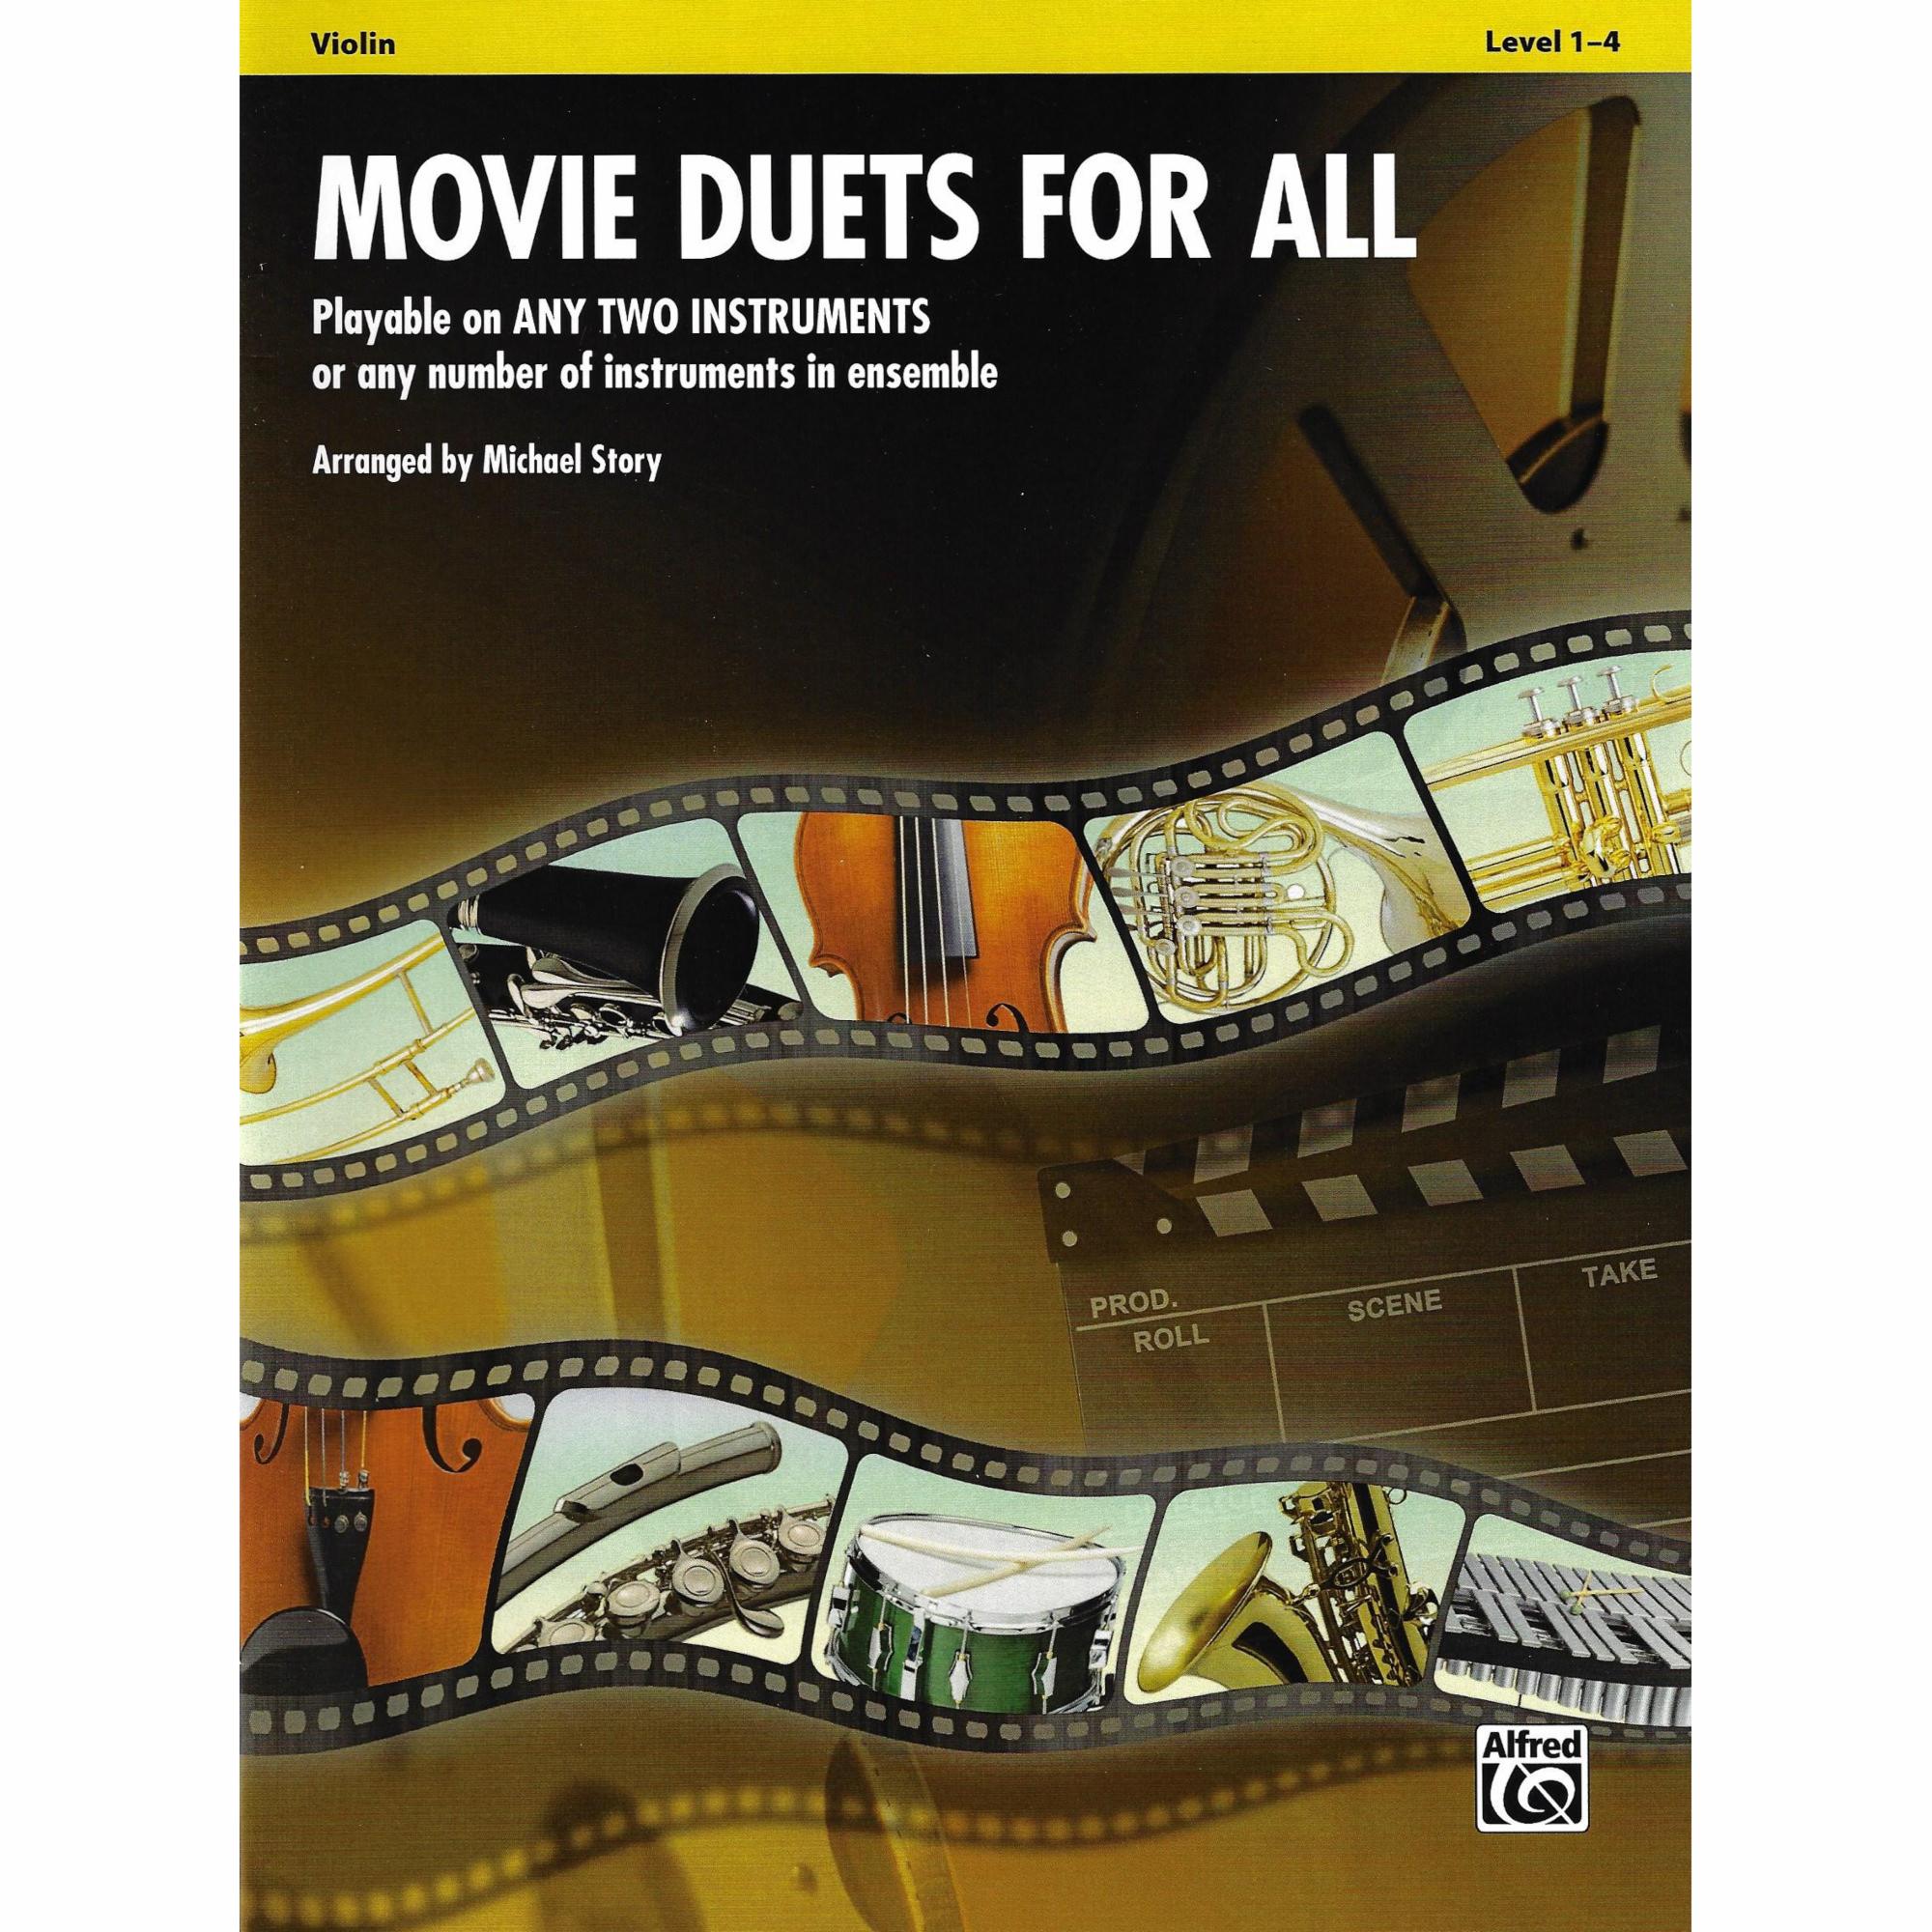 Movie Duets for All